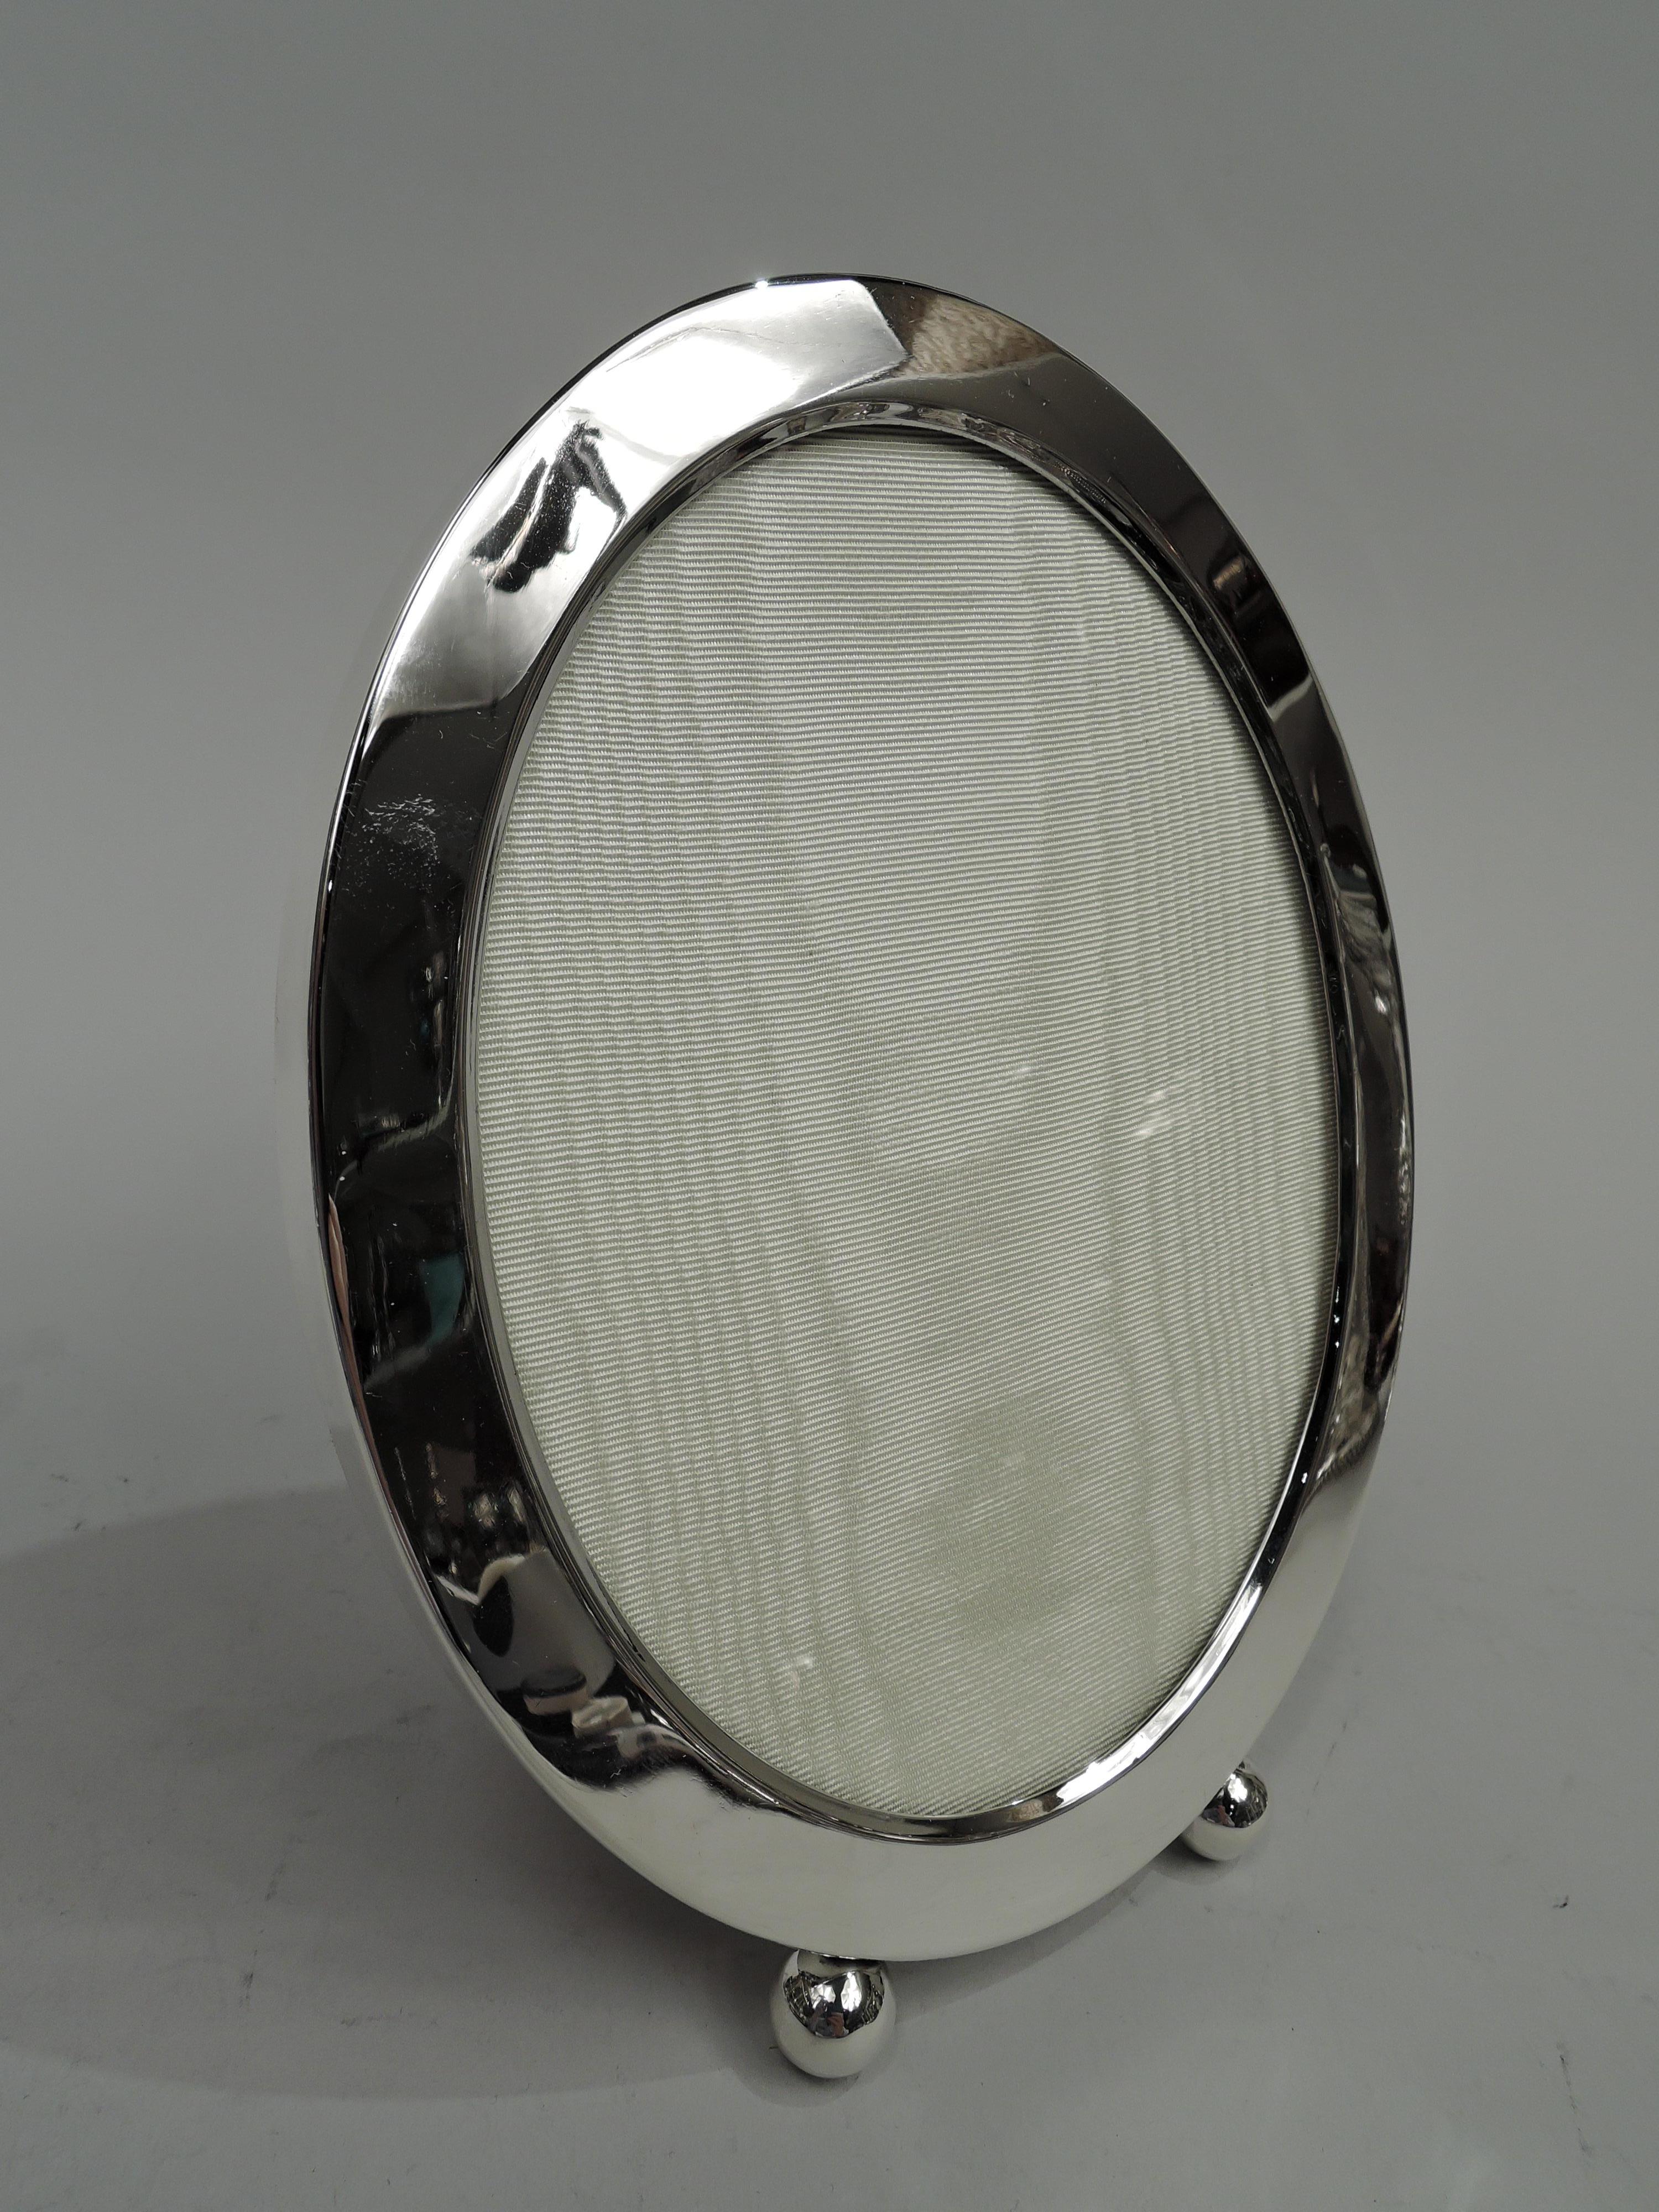 American Edwardian Modern sterling silver picture frame, ca 1910. Oval window in same surround with canted interior border and flat sides. Two ball supports. Simple and unadorned for the perfect portrait. With glass, silk lining, and red velvet back